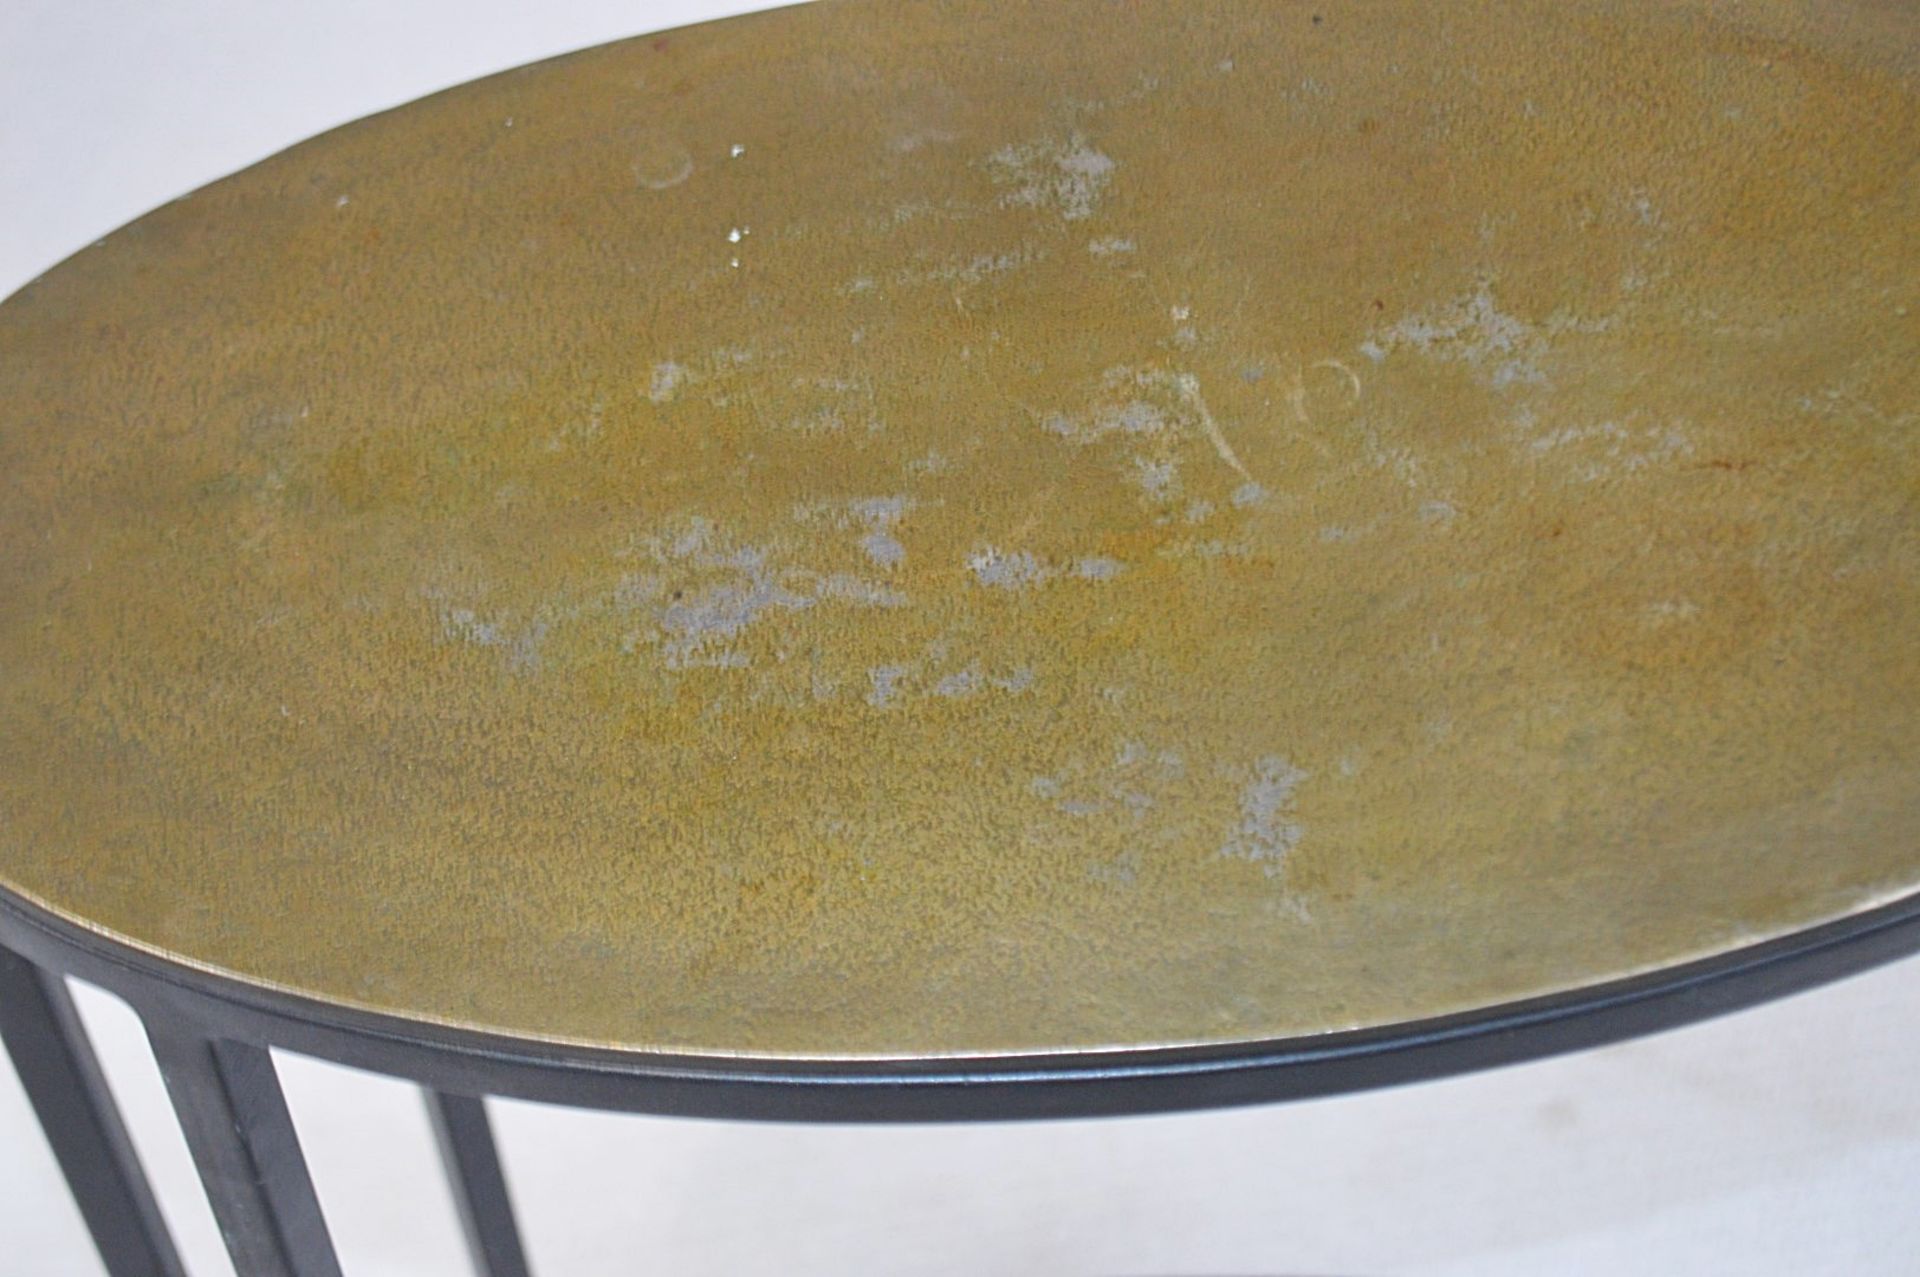 A Pair Of Elegant Oval Shaped Side Tables With Slim Metal Bases And Textured Brass Finish - - Image 3 of 3